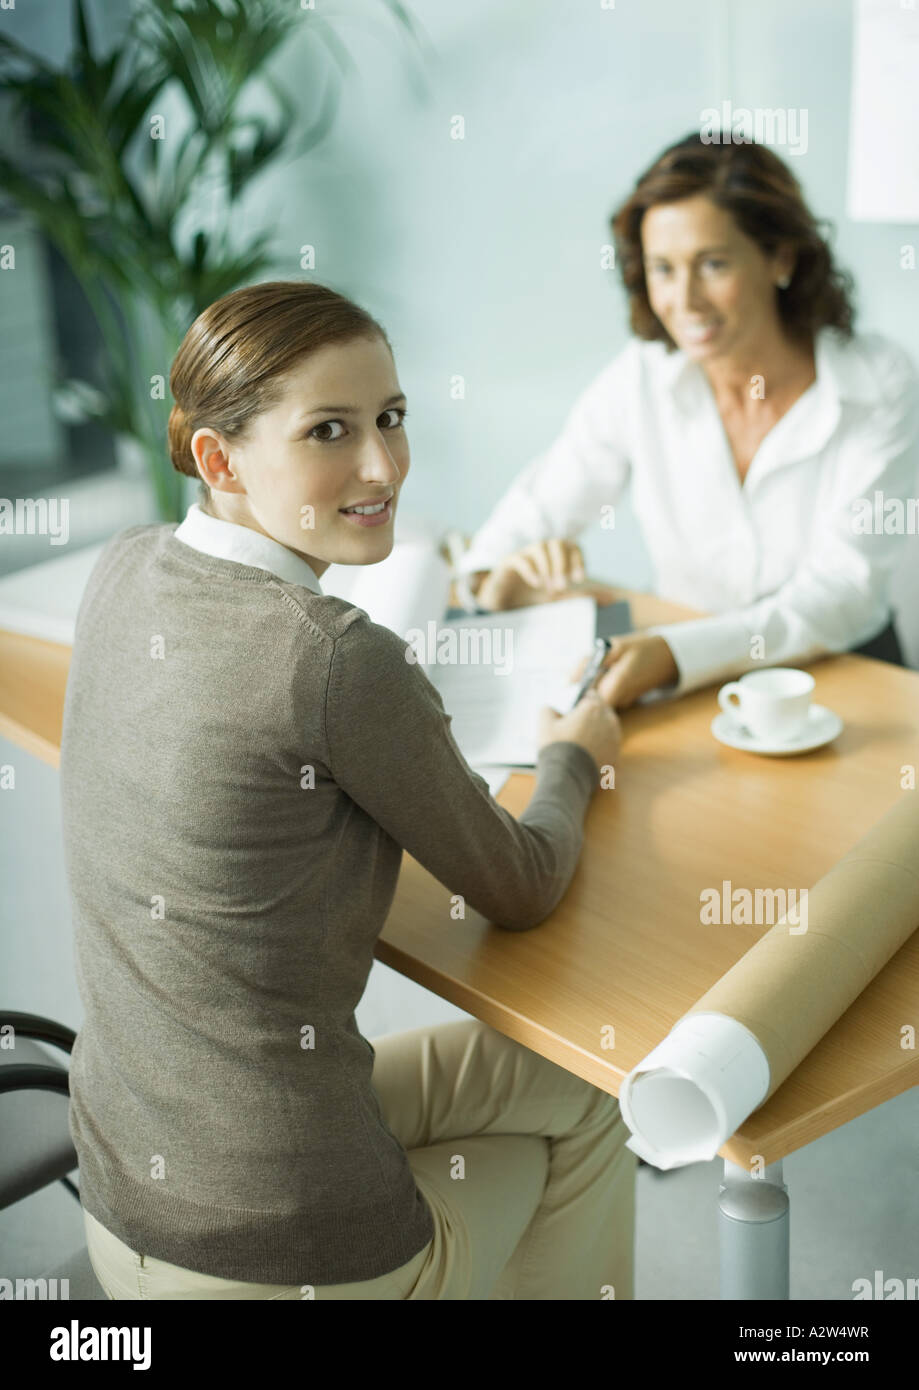 Woman sitting at table across from architect, smiling over shoulder at camera Stock Photo